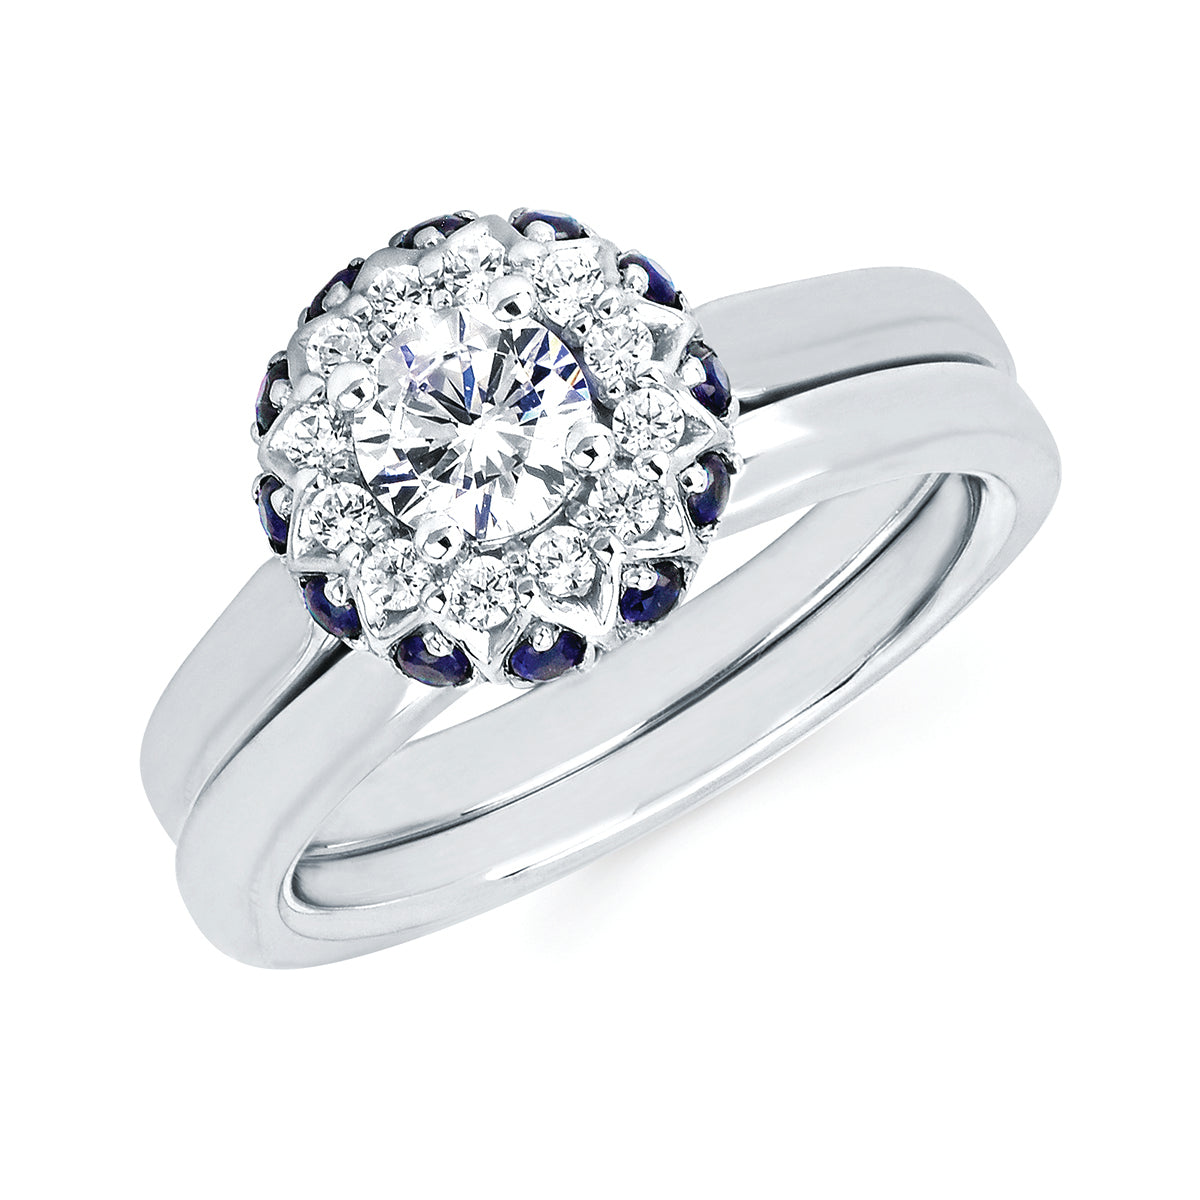 Halo Bridal: 1/2 Ctw. Diamond Halo Semi Mount available for 1/2 Ct. Round Center Diamond in 14K Gold